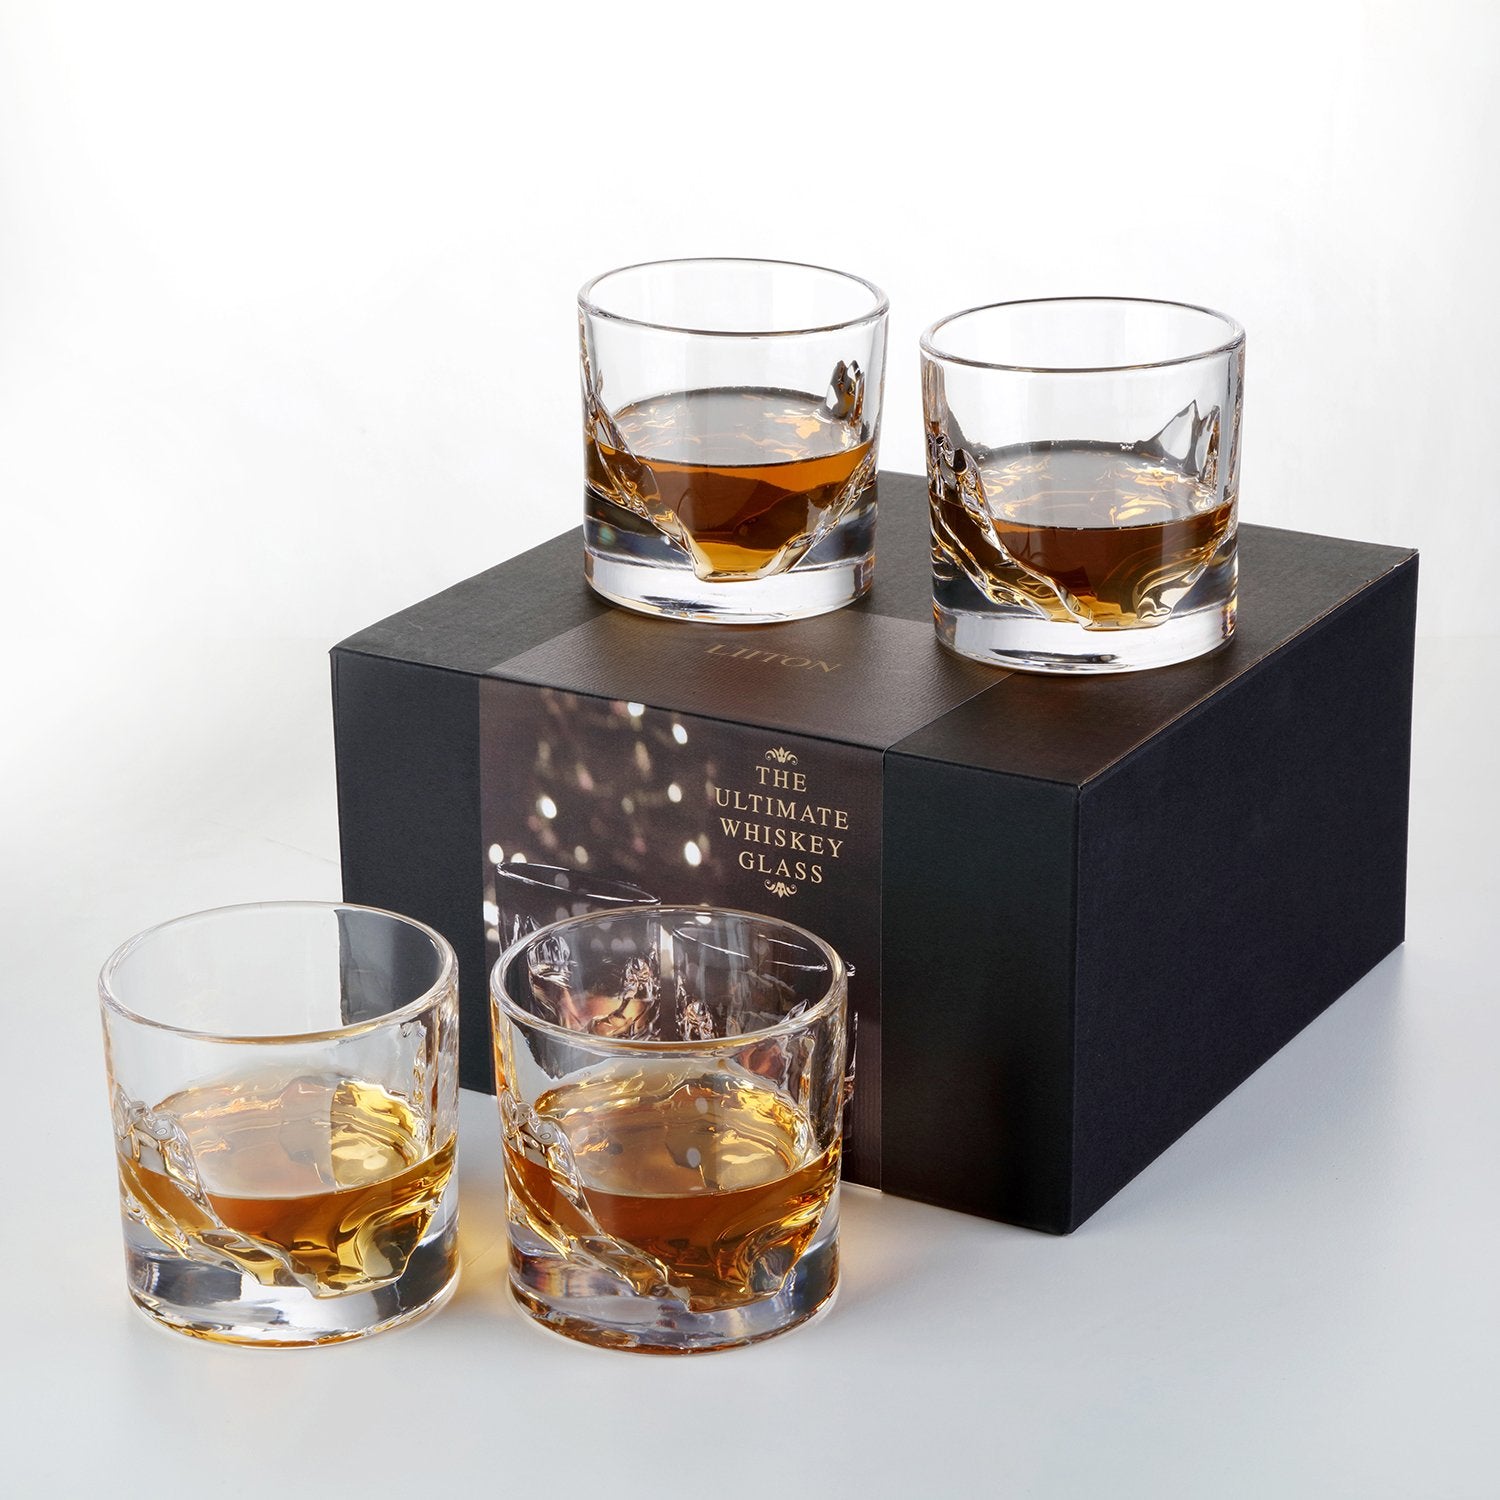 Whiskey Glass, Stones, and Coasters Personalized Gift Box Set - Groovy Guy  Gifts